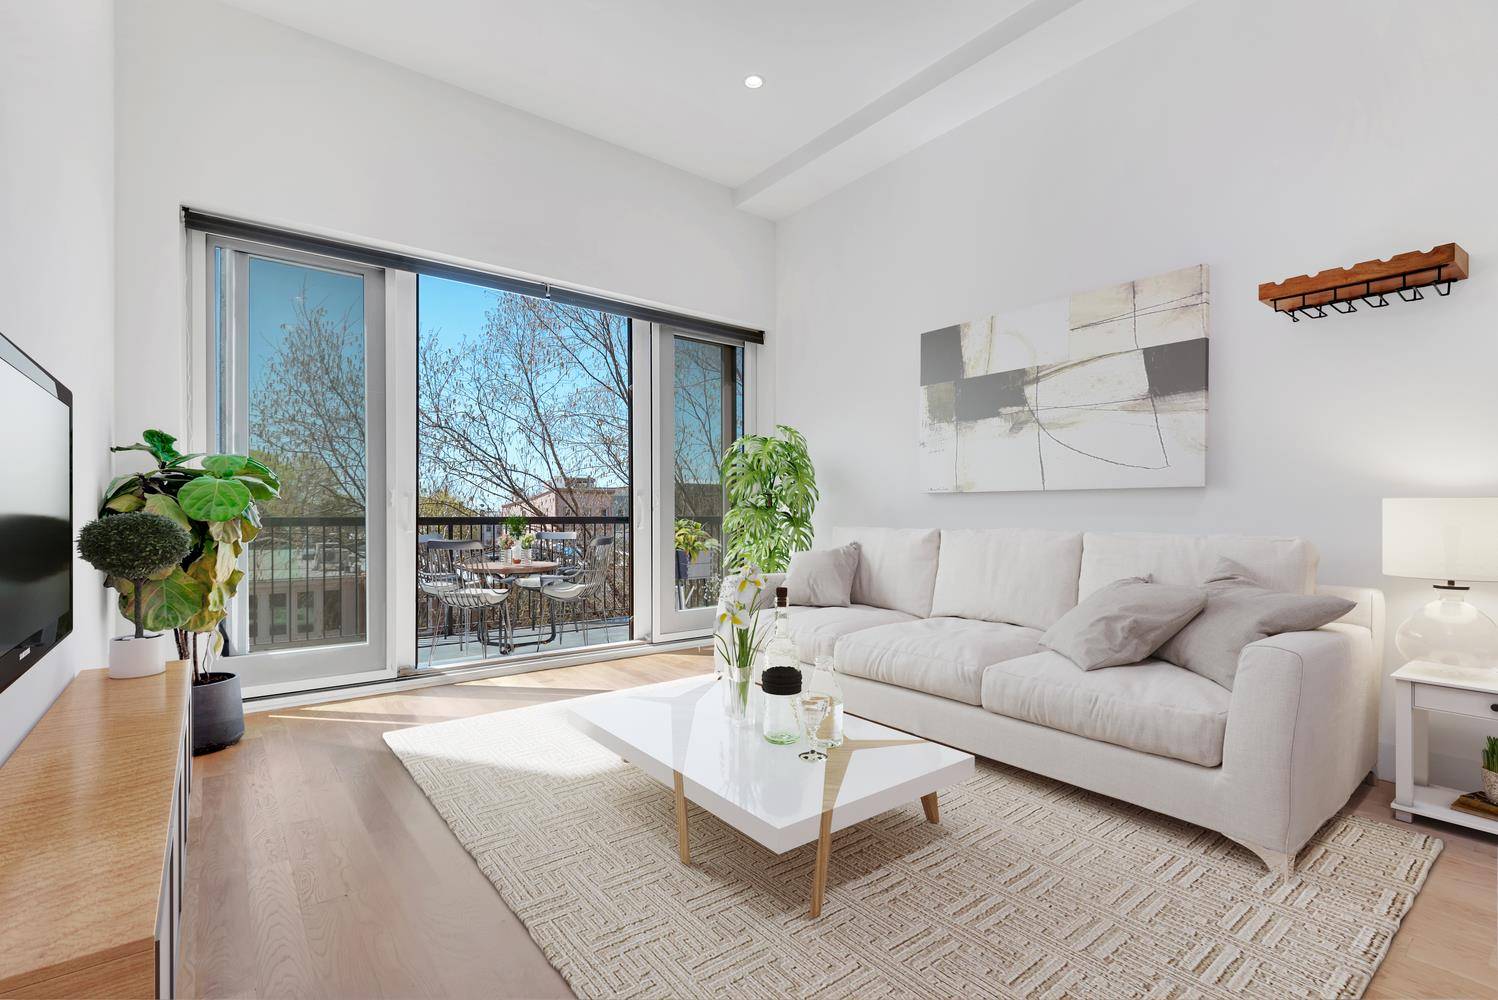 An exceptional beauty awaits you in the sought after Greenwood Heights neighborhood of Brooklyn, boasting 2 spacious light filled stories, a large outdoor balcony, and fabulous private roof terrace for ...